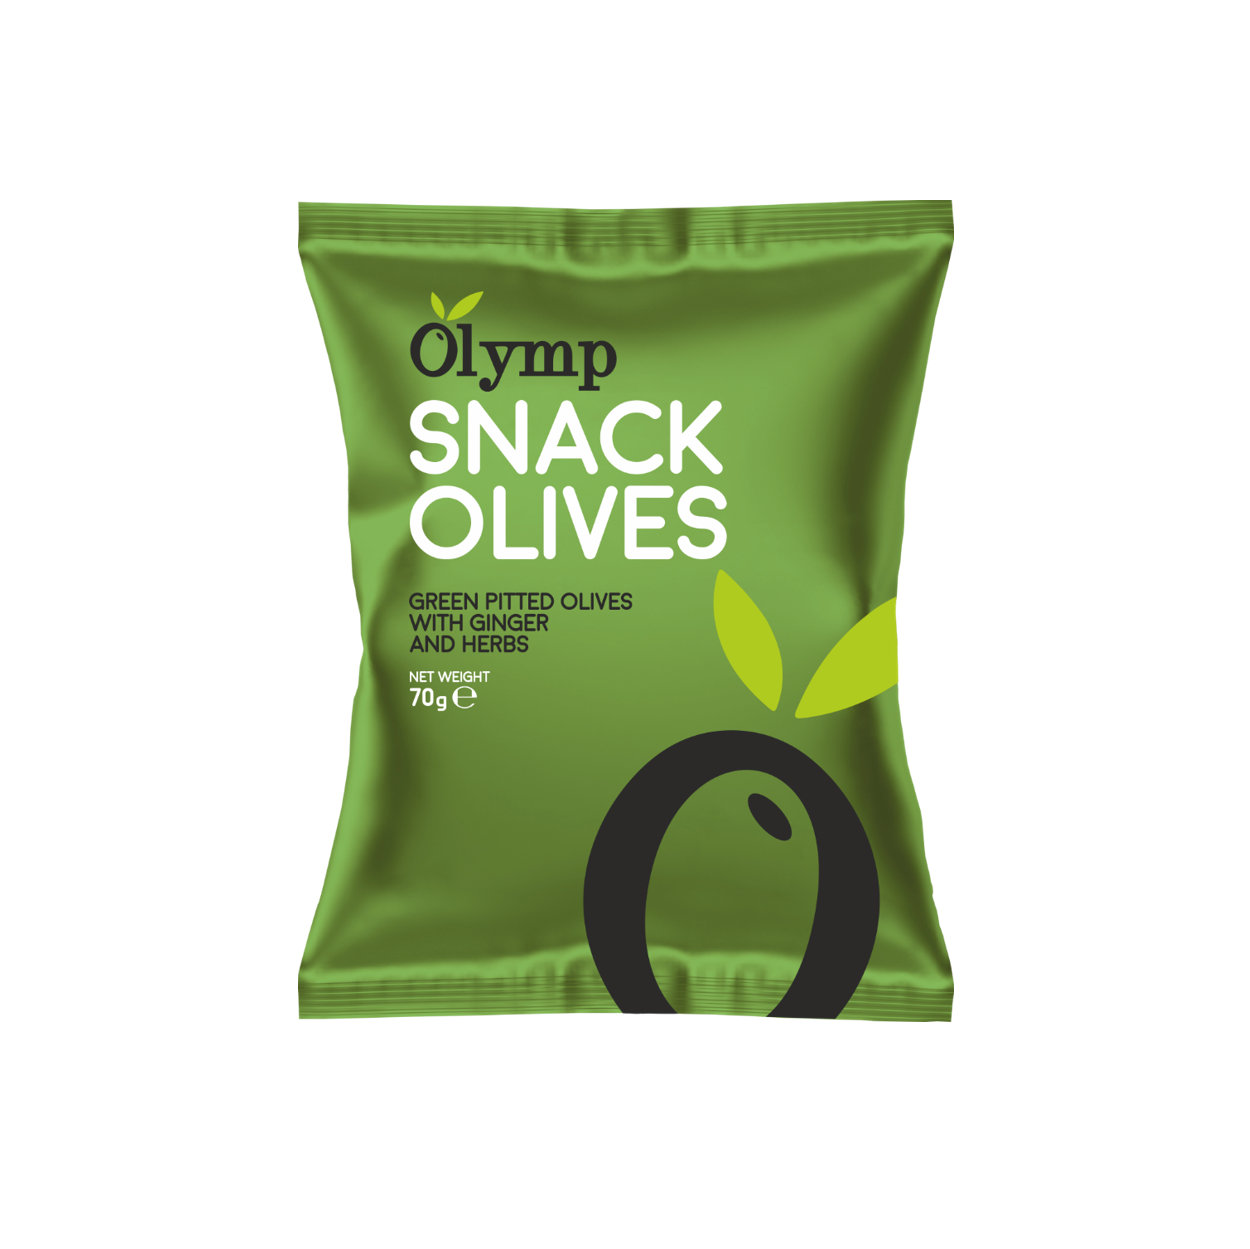 Olymp green pitted snack olives